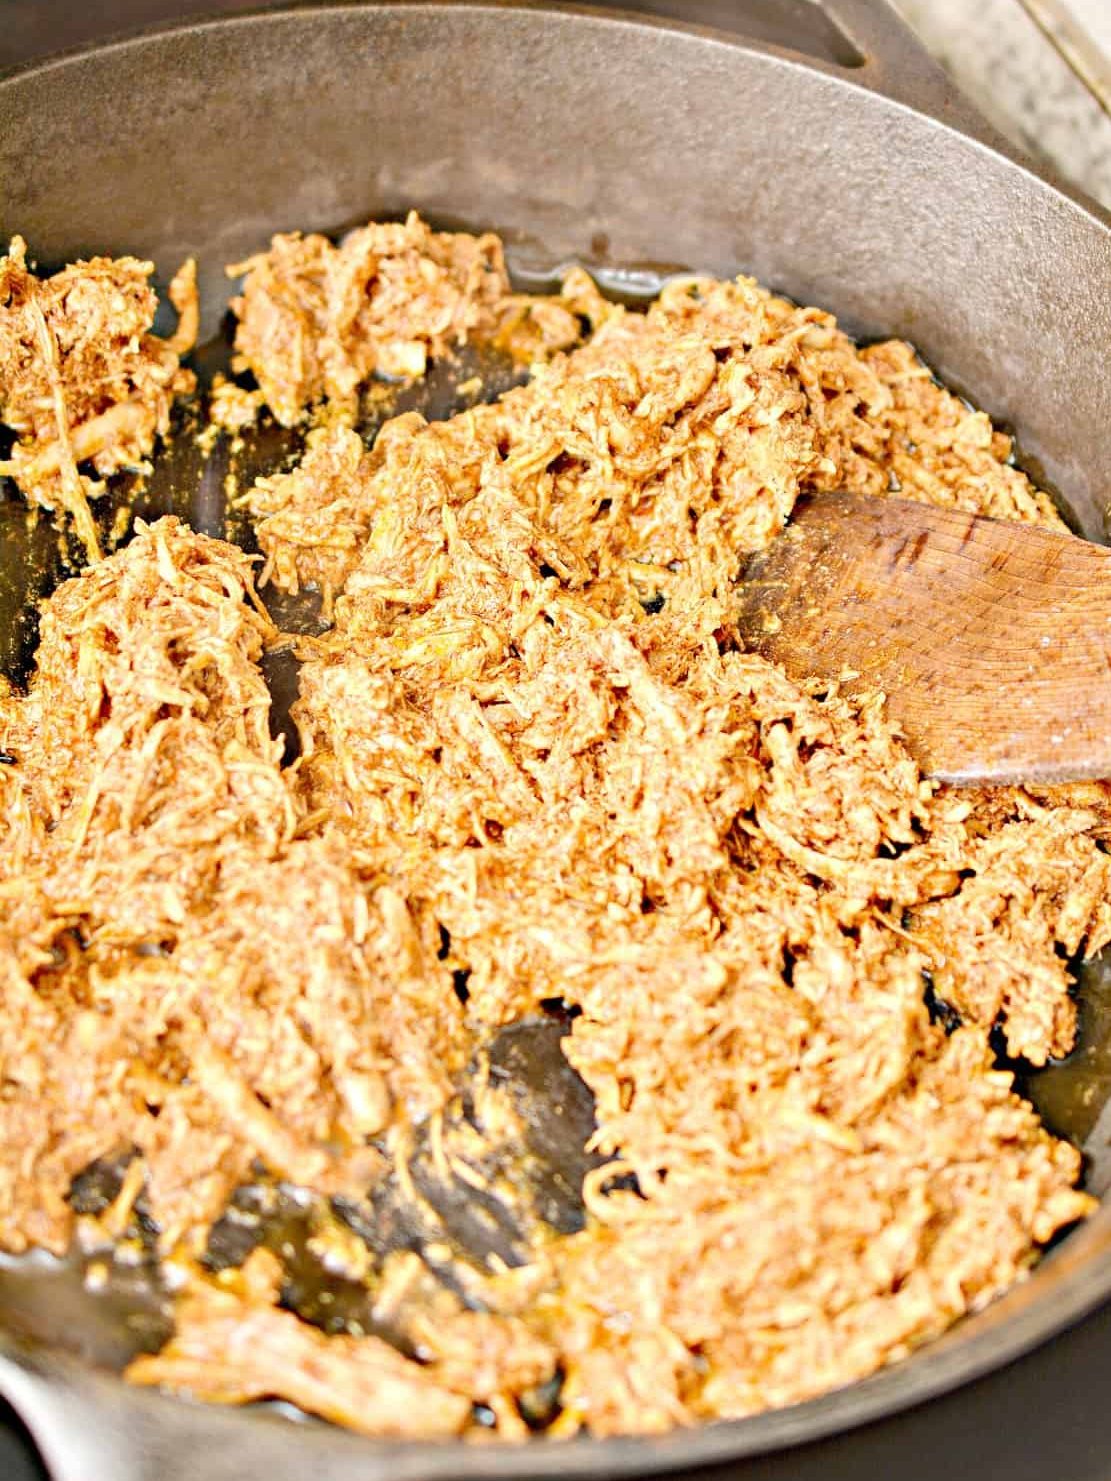 Add the shredded chicken and ¼ cup of the enchilada sauce to the skillet, and stir to combine.